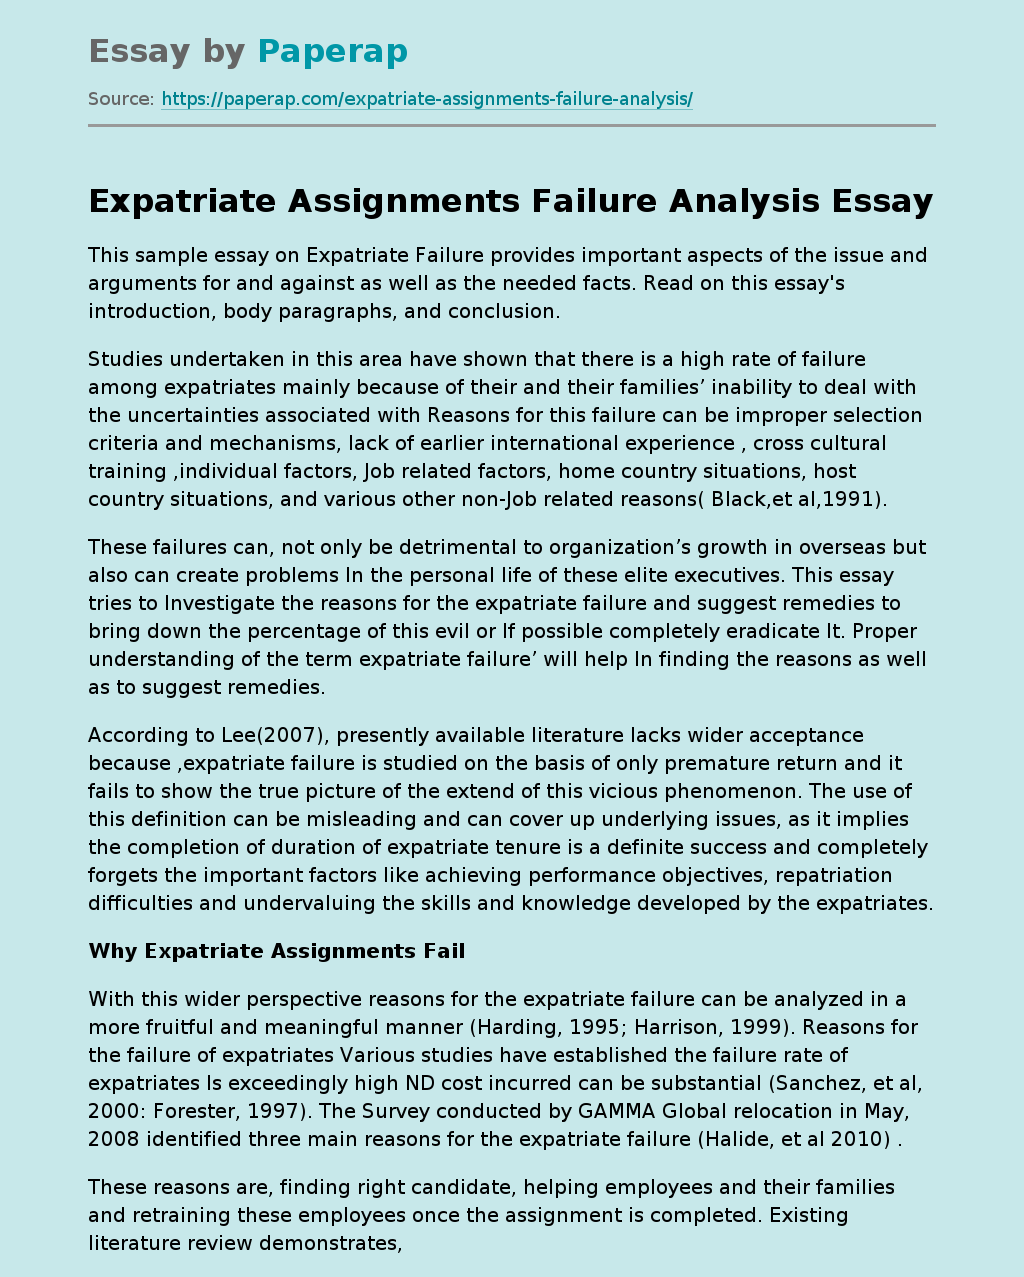 primary reason for failed expatriate assignments